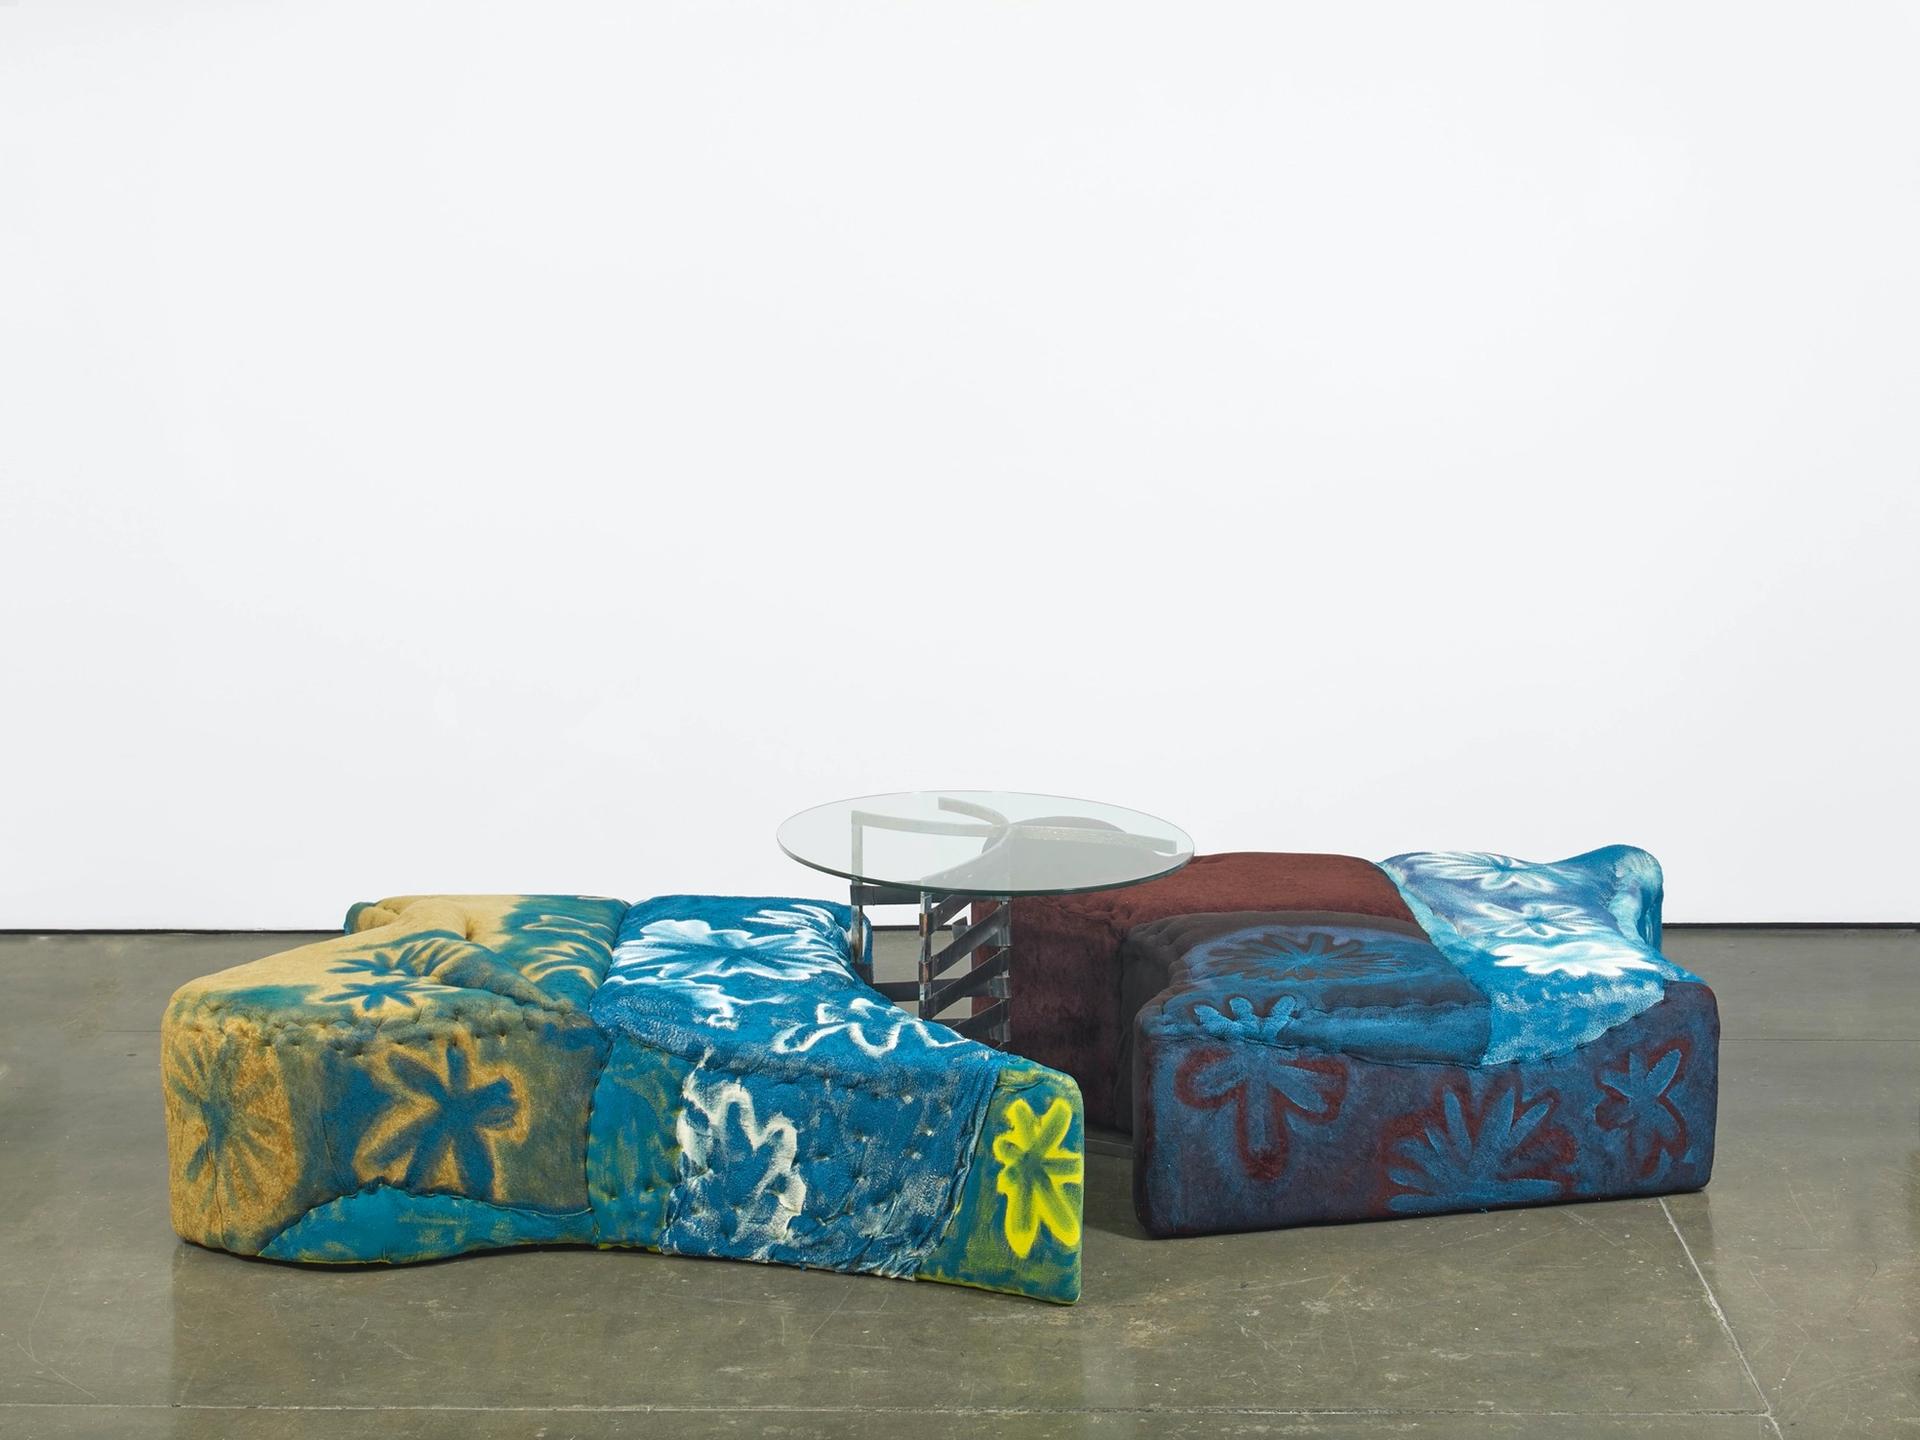 Jessi Reaves, Floral ottoman with trapped table, 2017-2019. Plywood, foam, fabric, paint, hardware, glass and steel 30.3 × 145.7 × 102.4 in. (76.96 × 370.08 × 260.10 cm) Courtesy the artist, Herald St, London and Bridget Donahue NYC. Photo: Andy Keate.